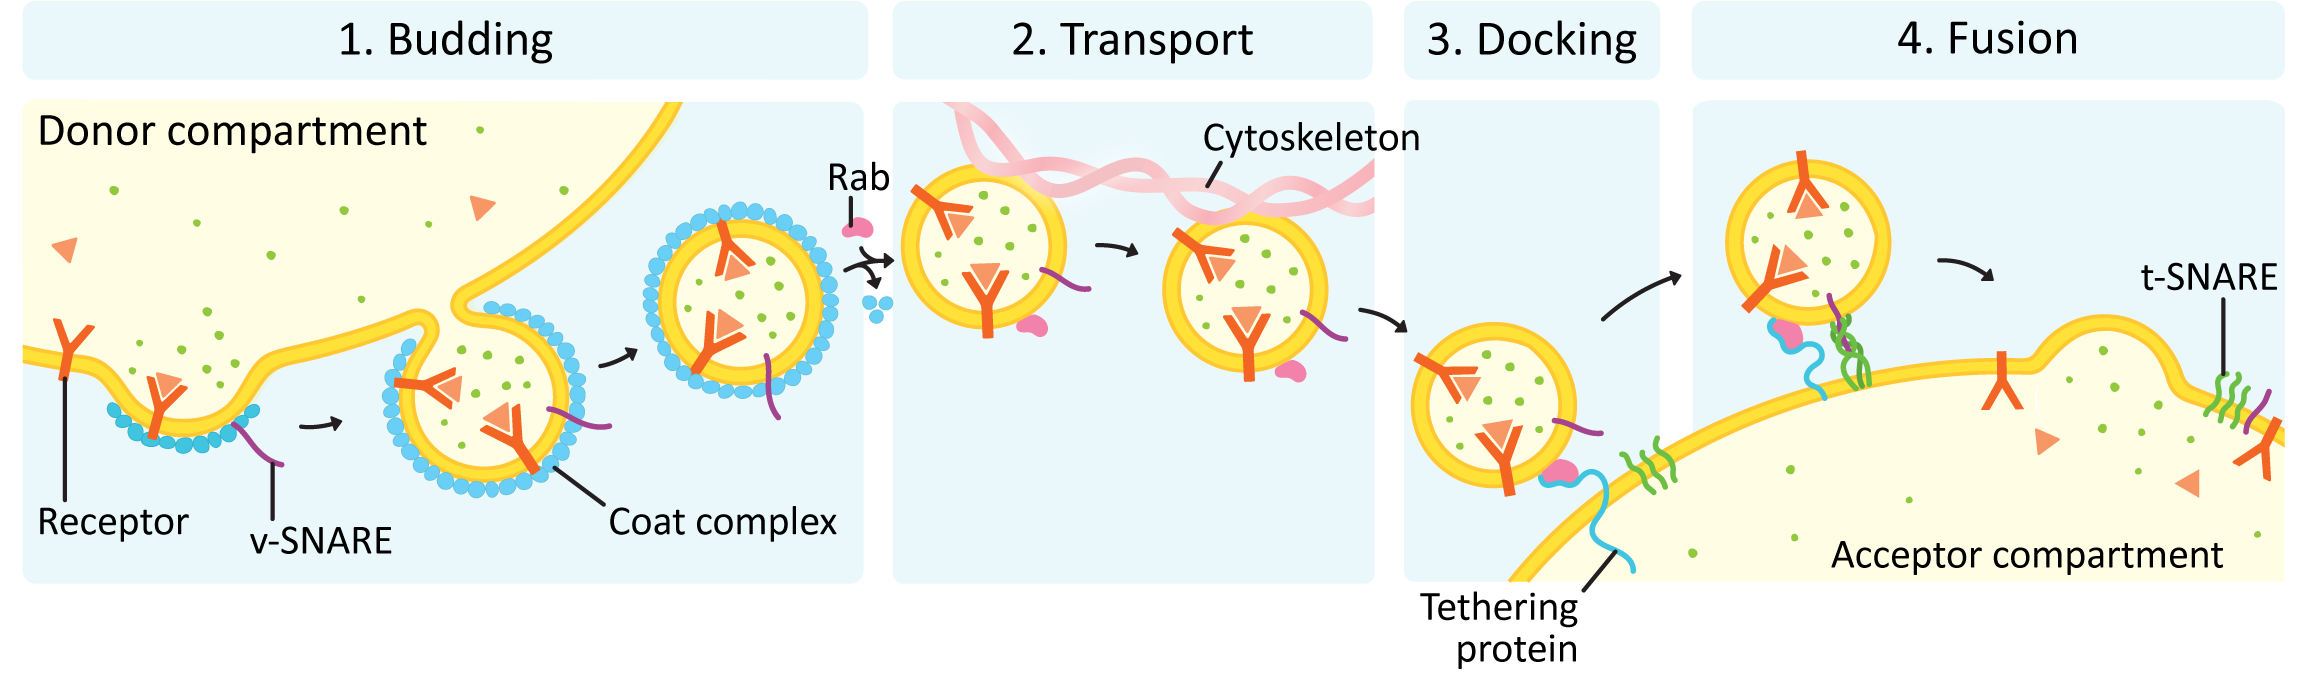 Diagram showing the stages of vesicle budding, transport, docking and fusion.